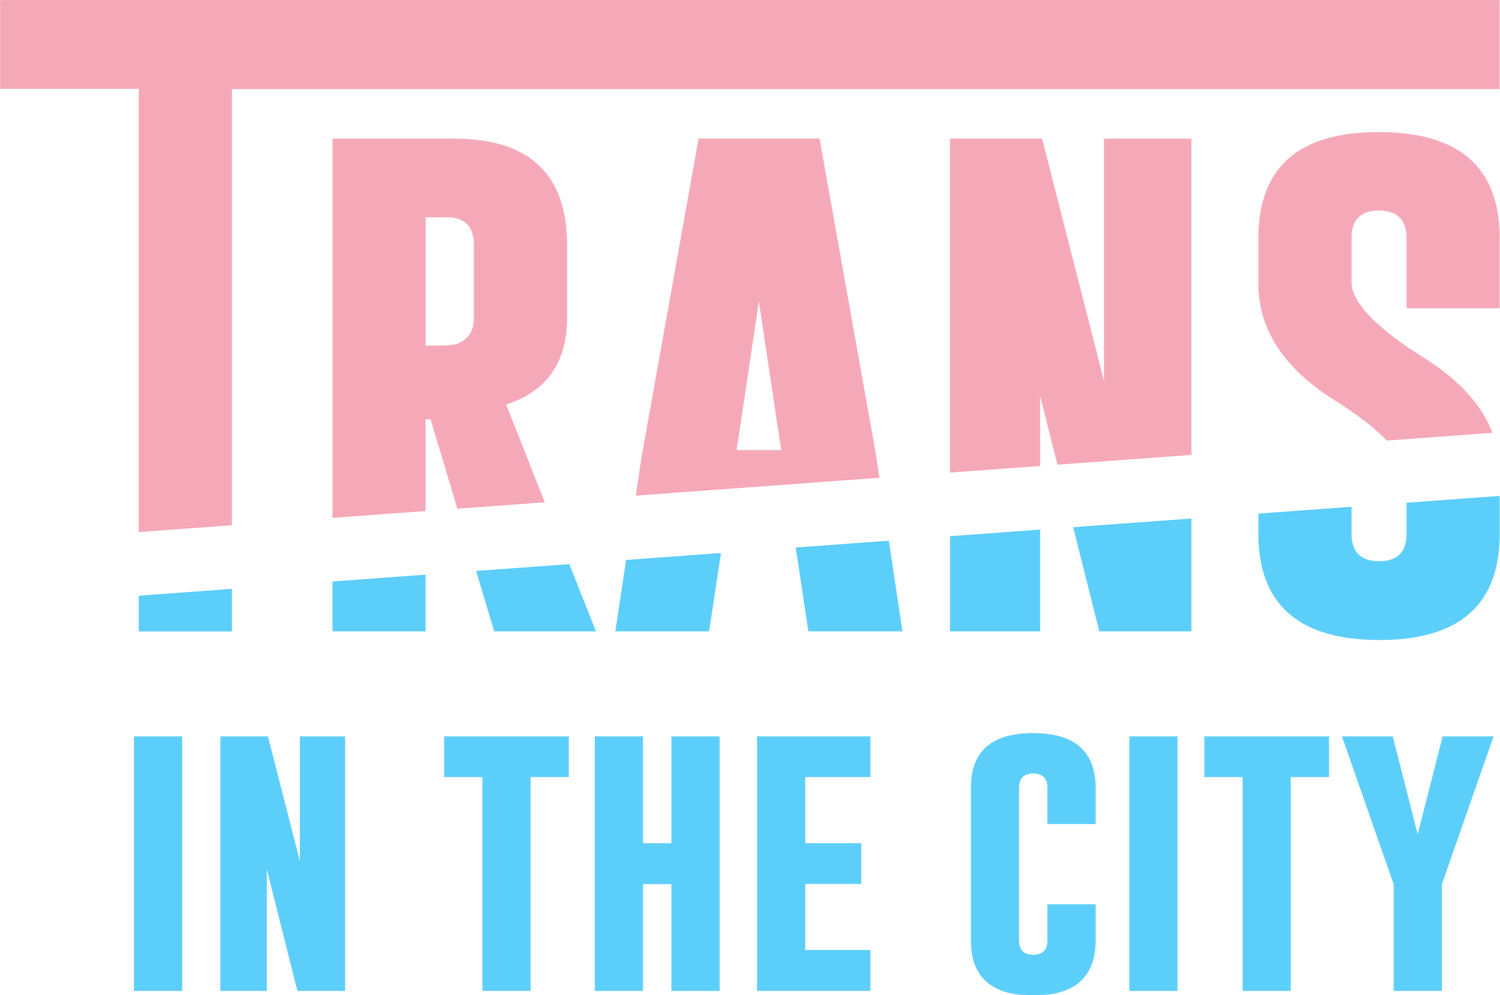 Trans in the City launches the Student Ambassador Program